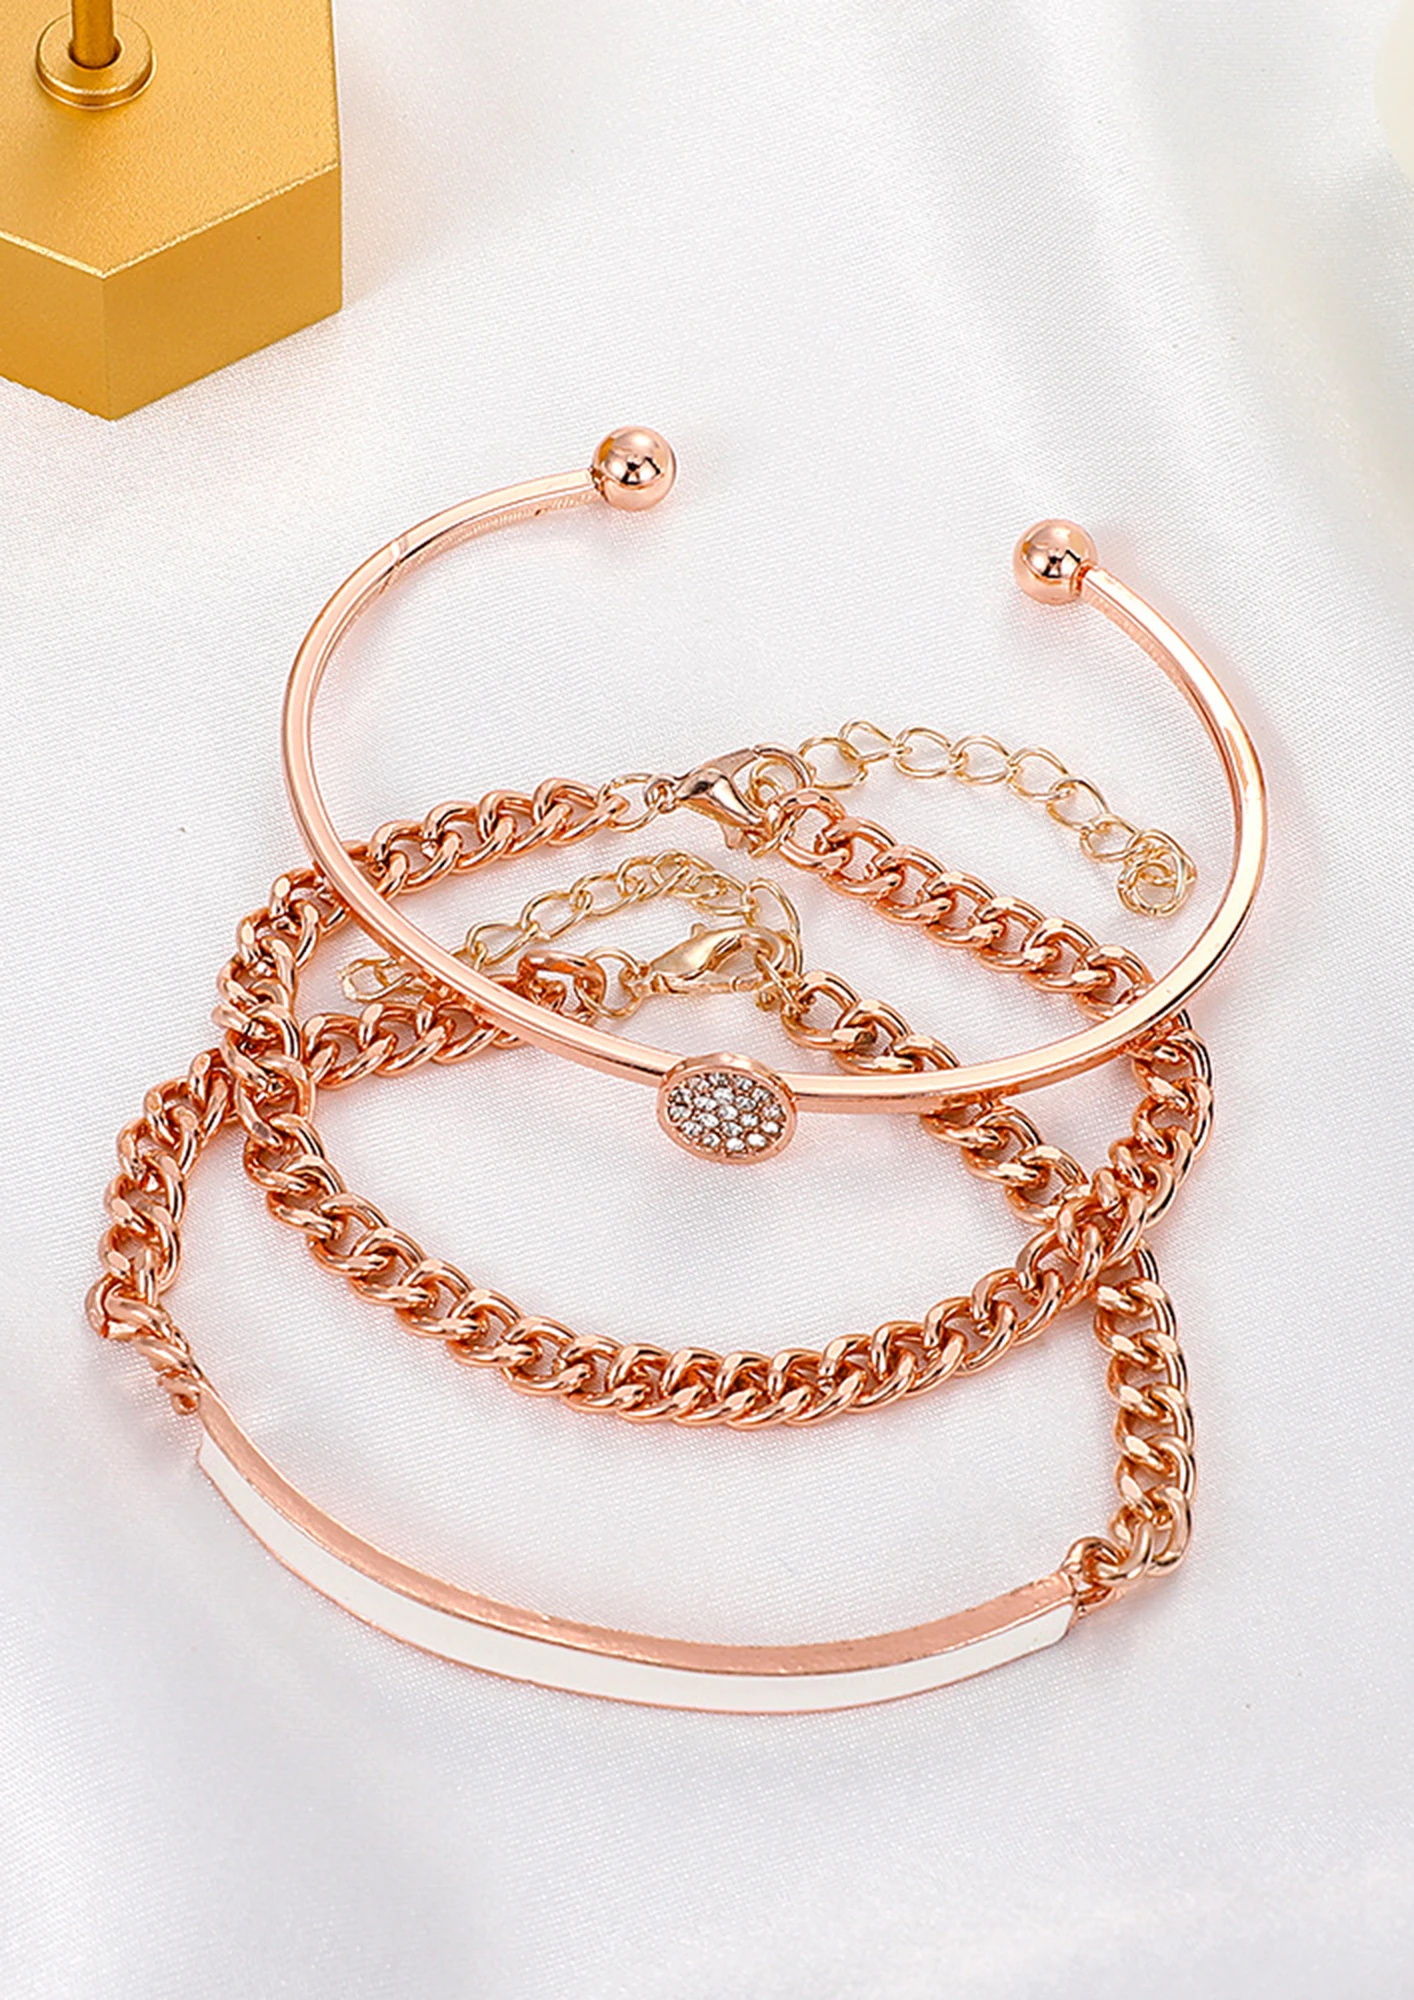 The Perfect Gift: Rose Gold Bracelets for Your Loved Ones